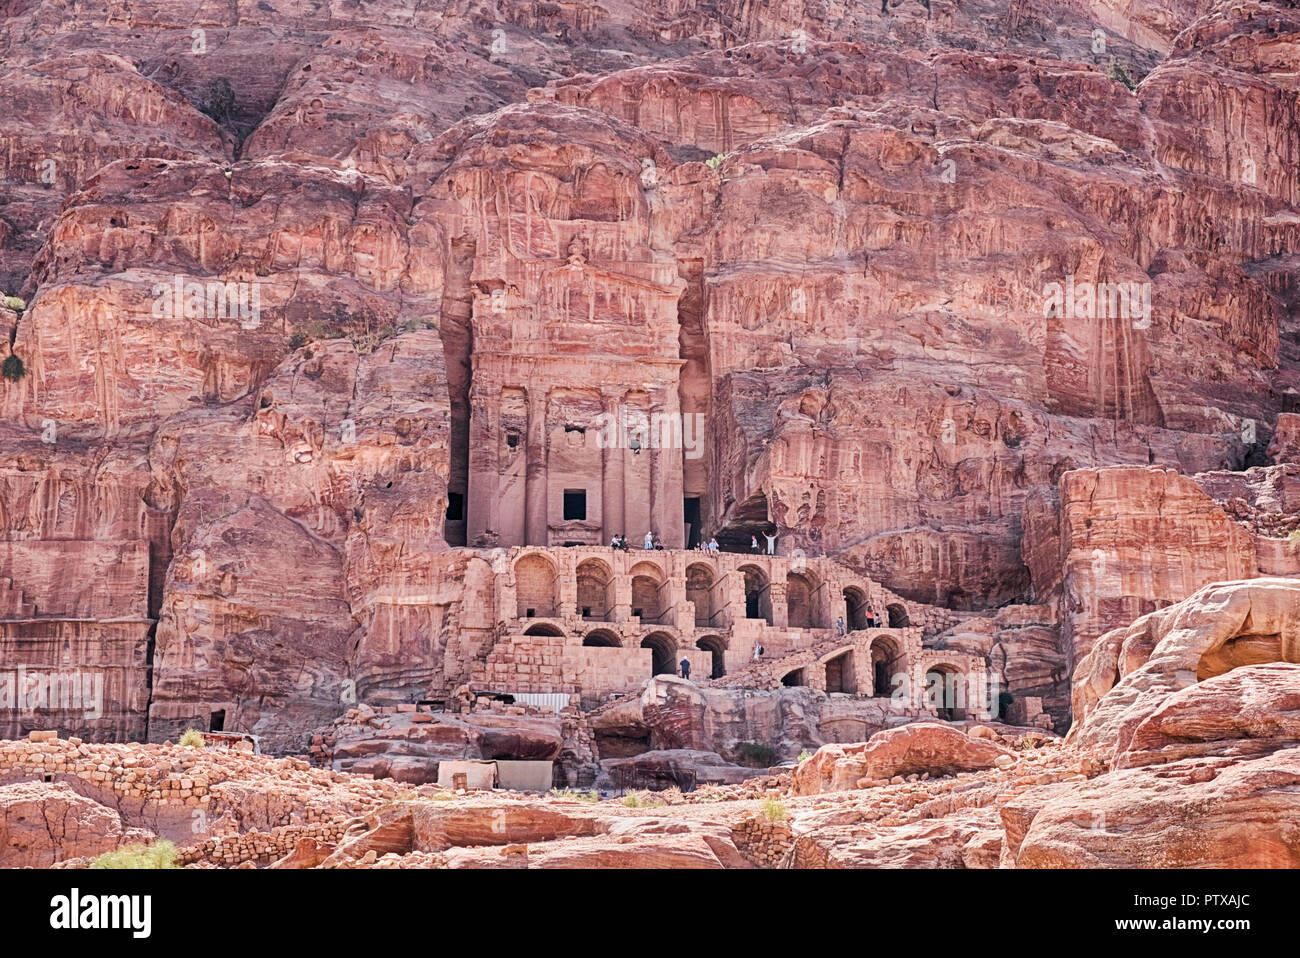 The Urn Tomb, a part of the Royal Tombs of Petra, is carved into the sandstone cliffs with a grand staircase to climb. Stock Photo